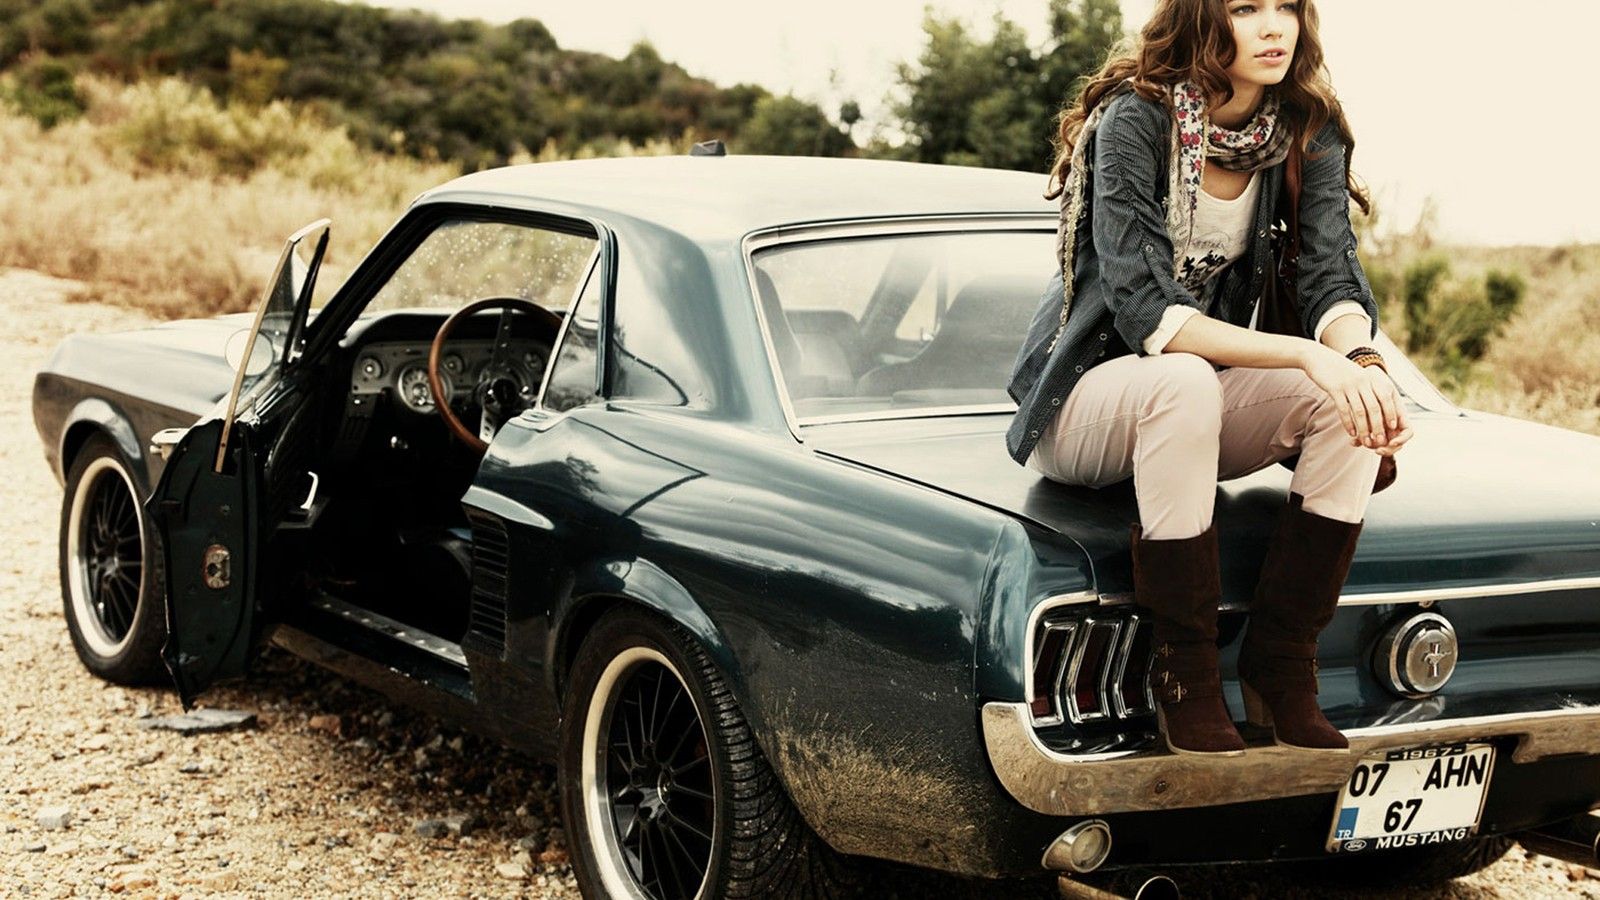 Wallpapers Mustang Pinup Car Girl Cars Women Models Muscle Turkey ...